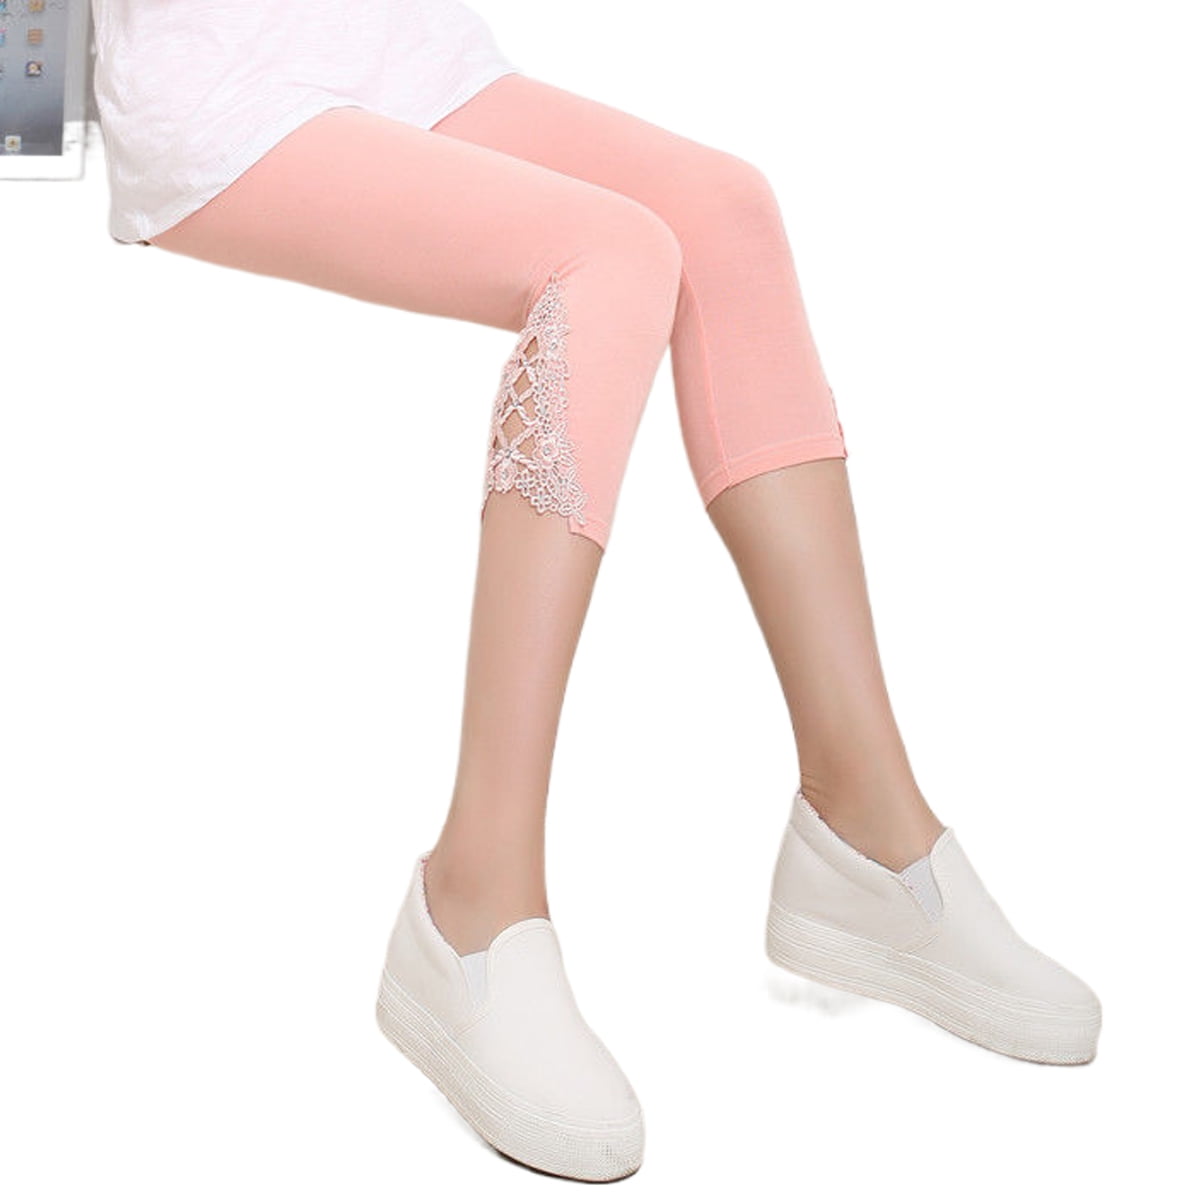 Lace Trim Capri Length Tights 12M to 11Y COUNTRY KIDS Black White Ivory Pink 